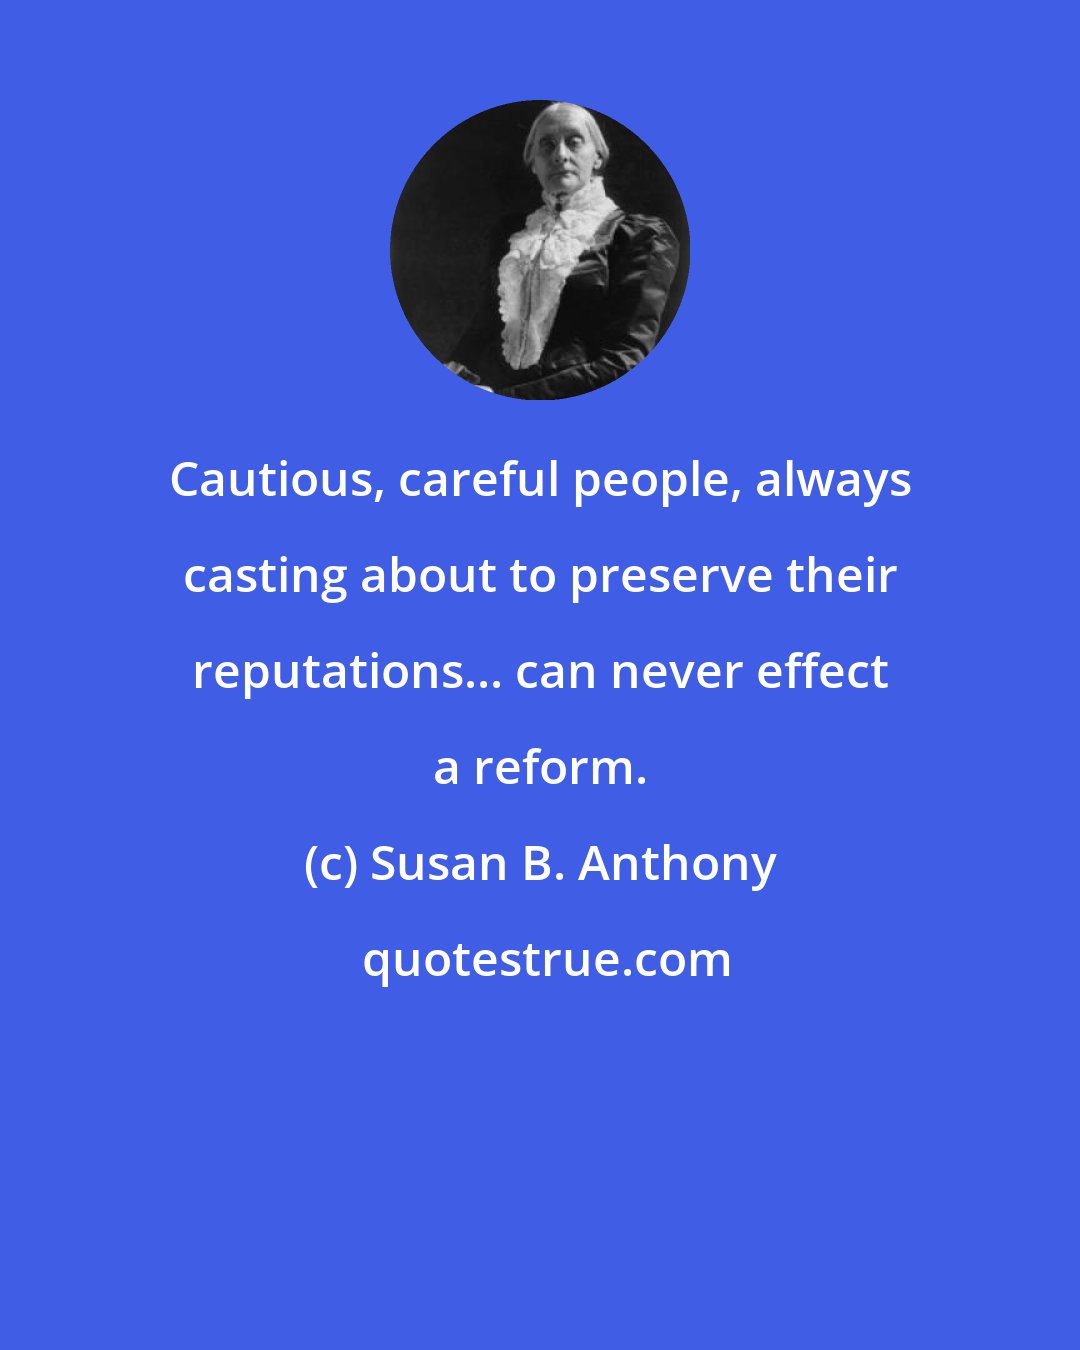 Susan B. Anthony: Cautious, careful people, always casting about to preserve their reputations... can never effect a reform.